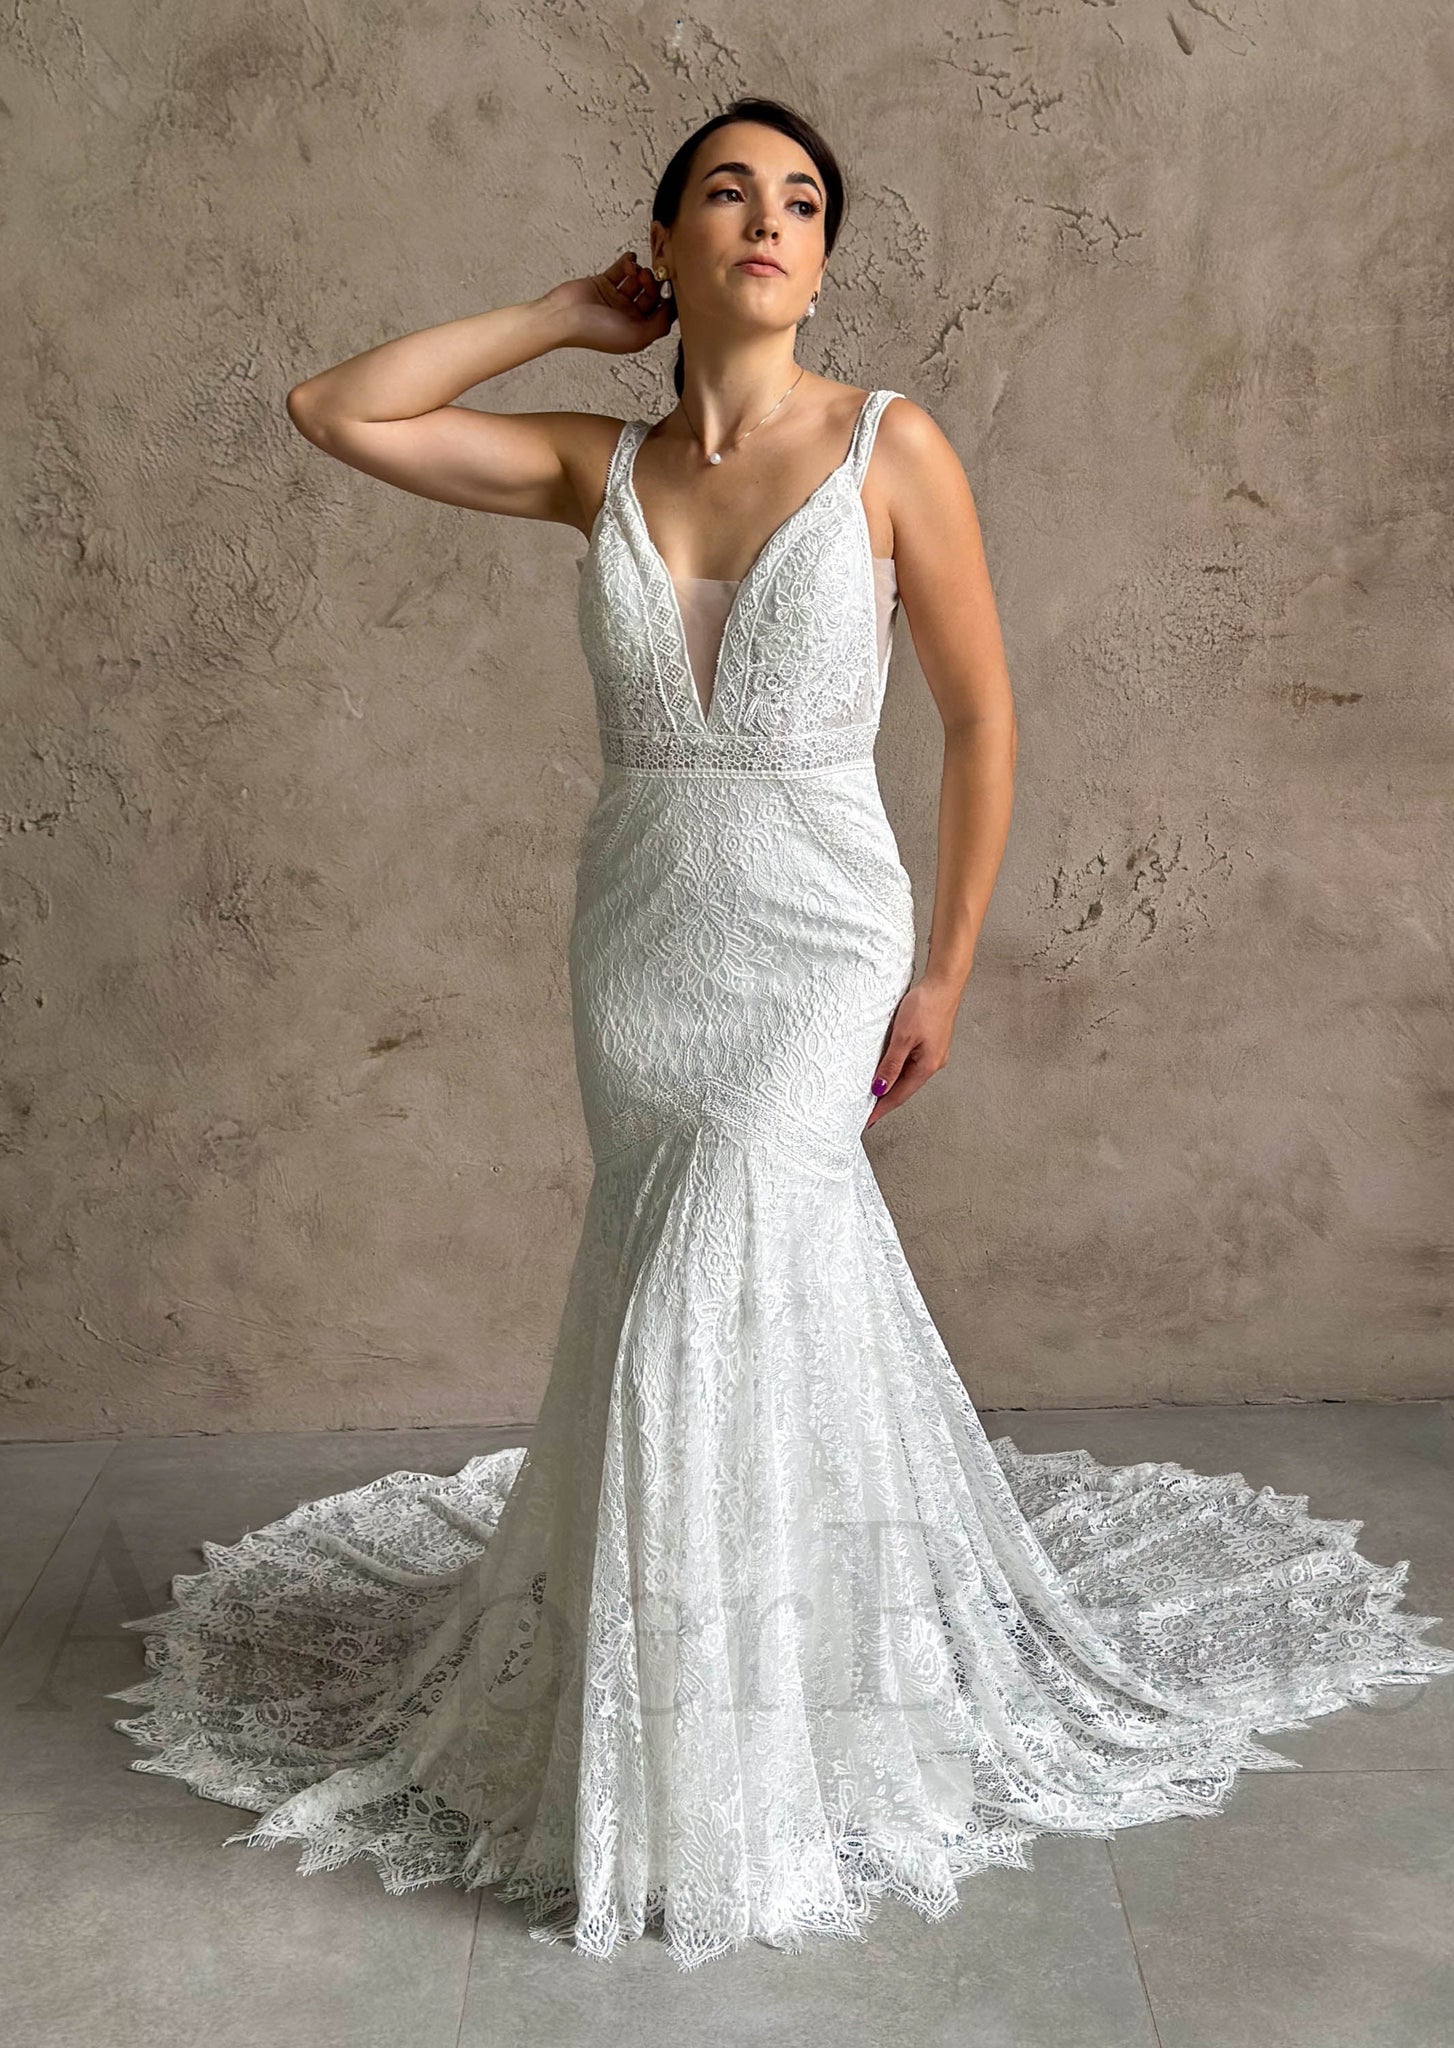 Boho Mermaid Lace Wedding Dress with Backless Design and Spaghetti Straps